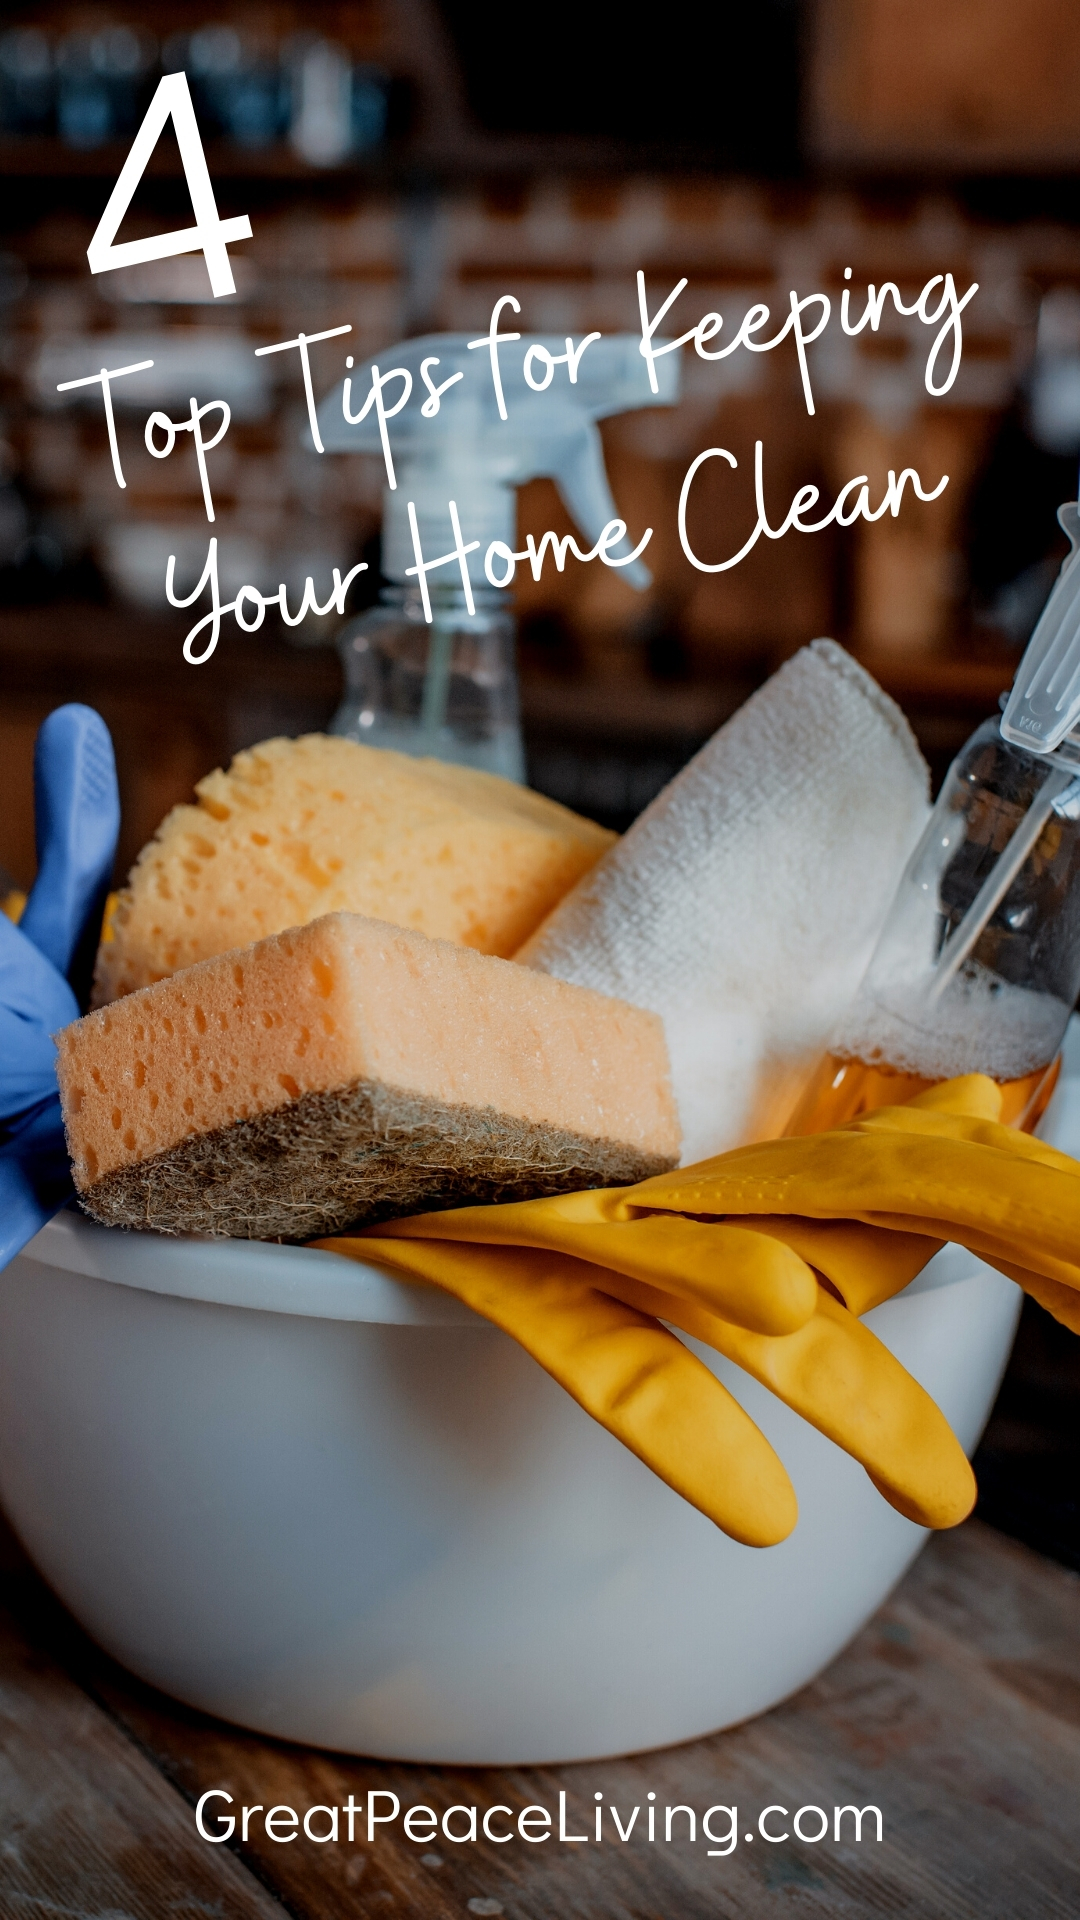 Best Tips to Keep Your Home Clean